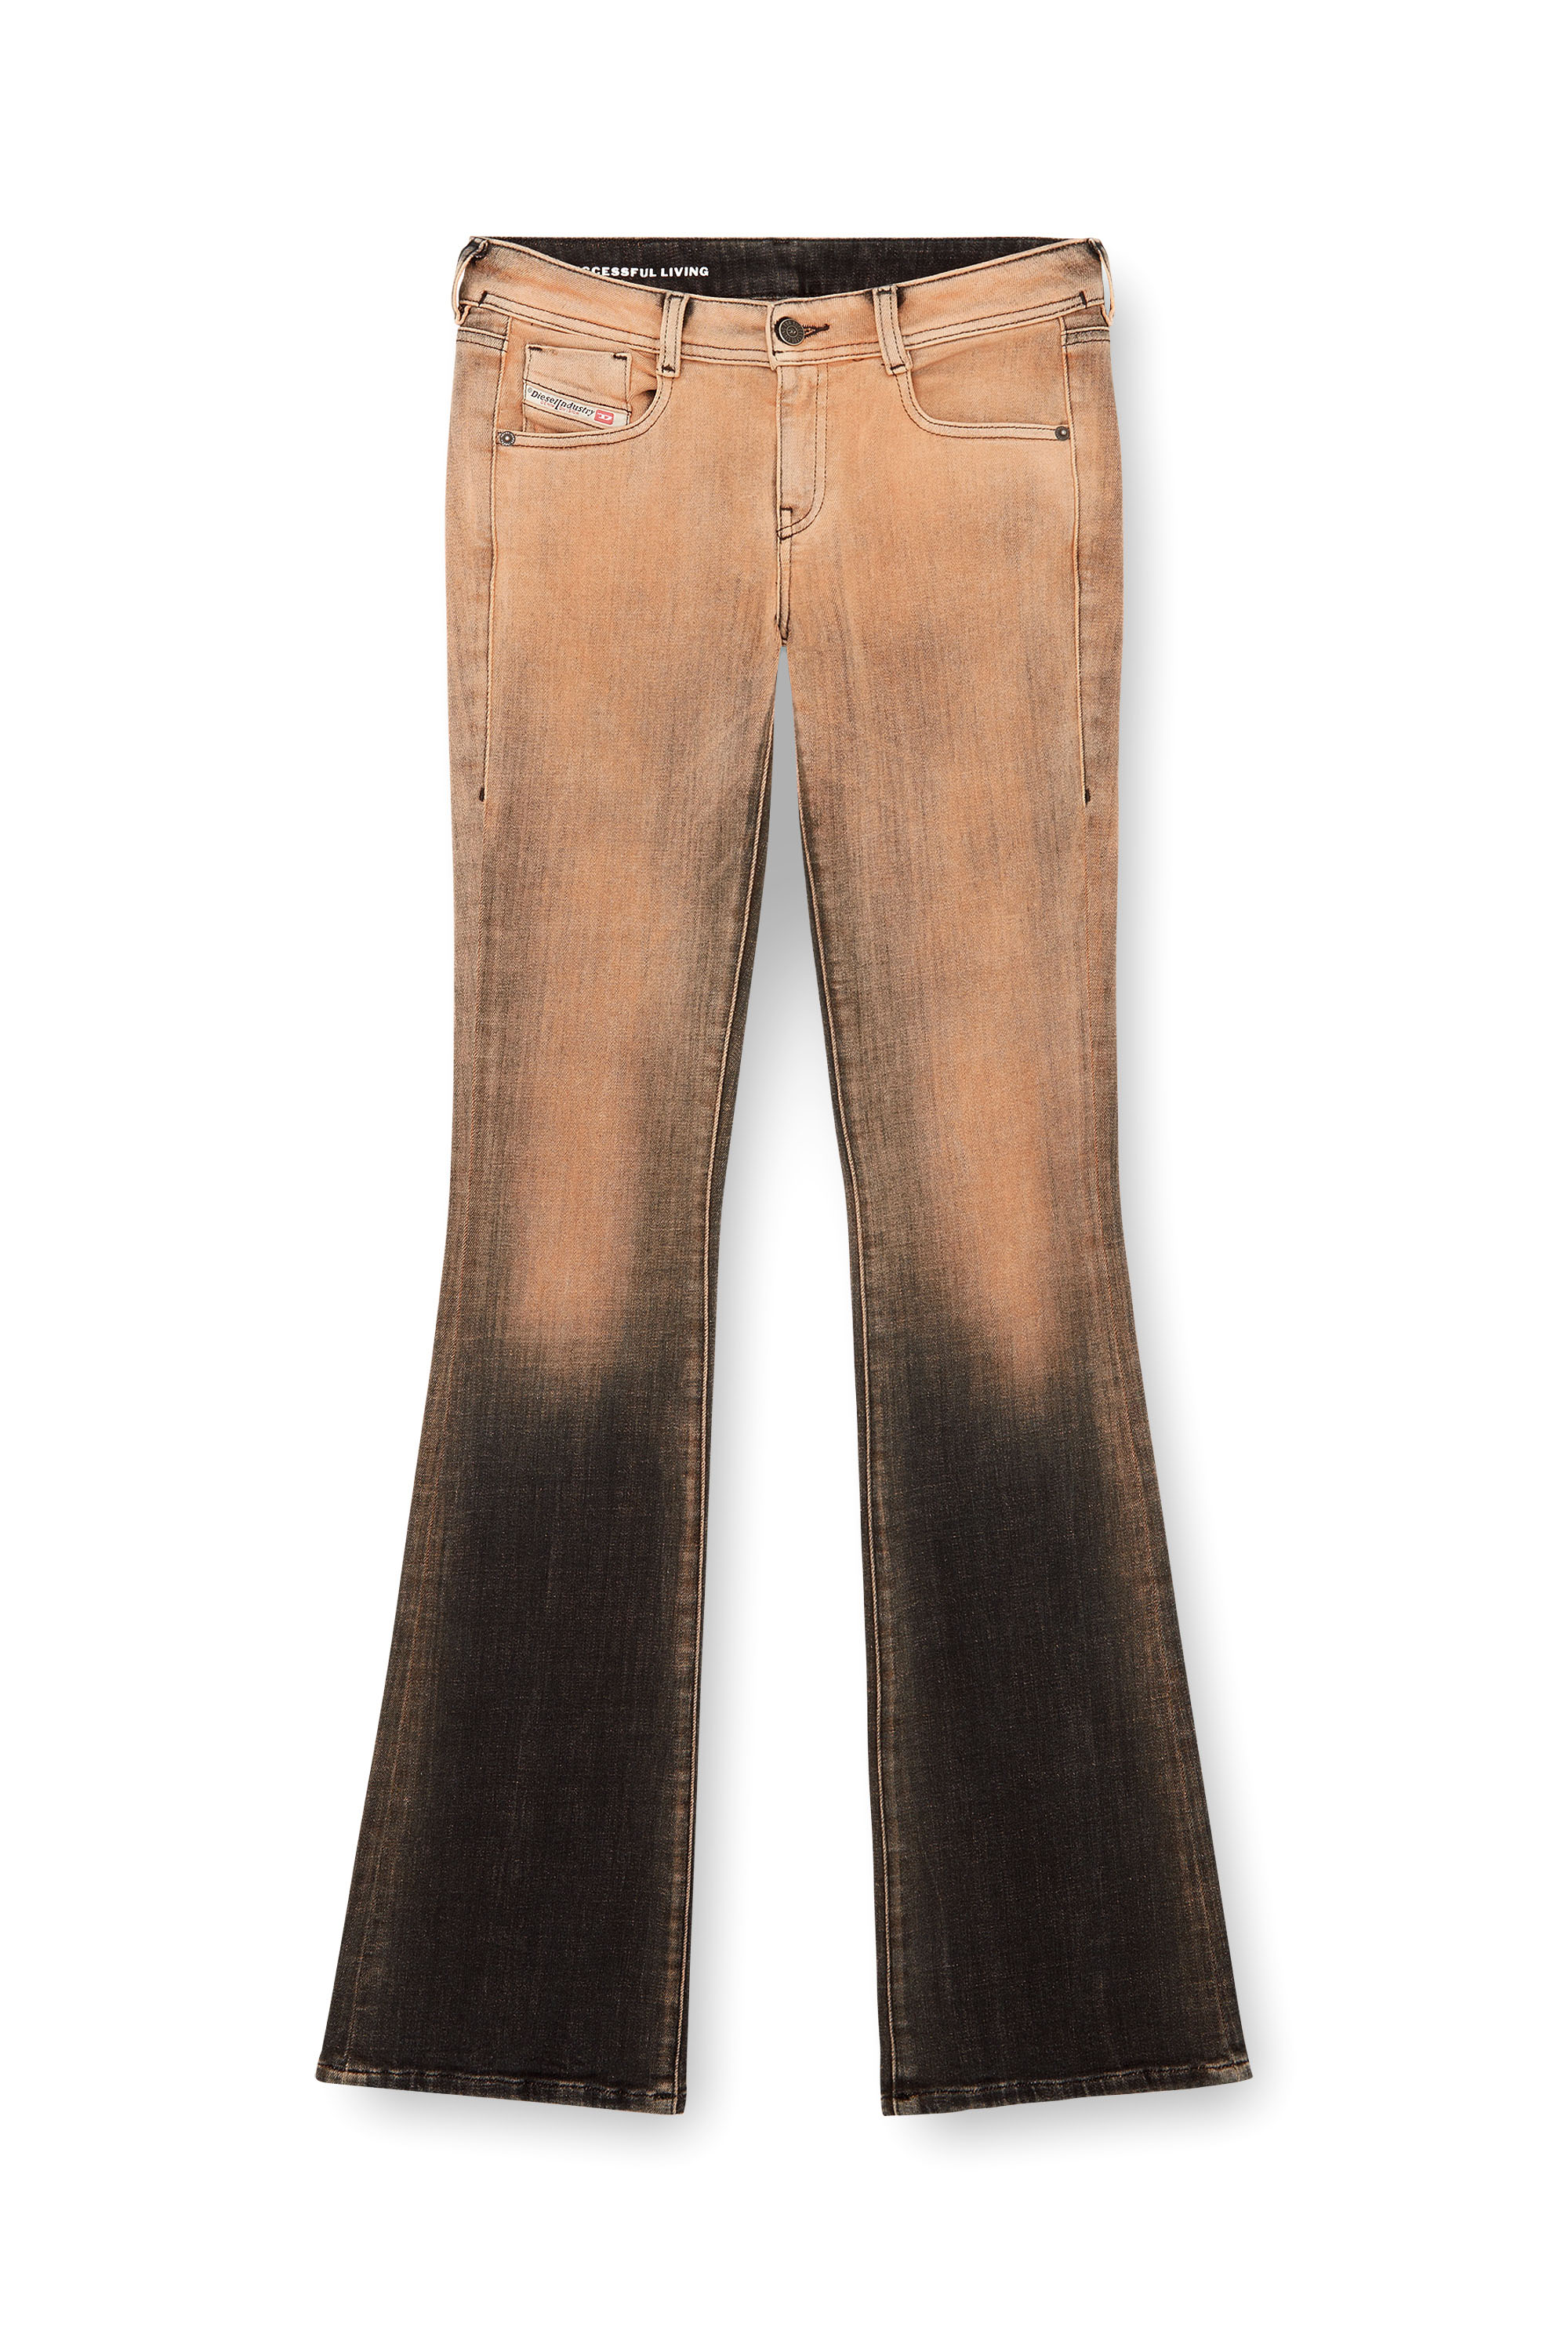 Diesel - Bootcut and Flare Jeans 1969 D-Ebbey 09K12, Mujer Bootcut y Flare Jeans - 1969 D-Ebbey in Multicolor - Image 3